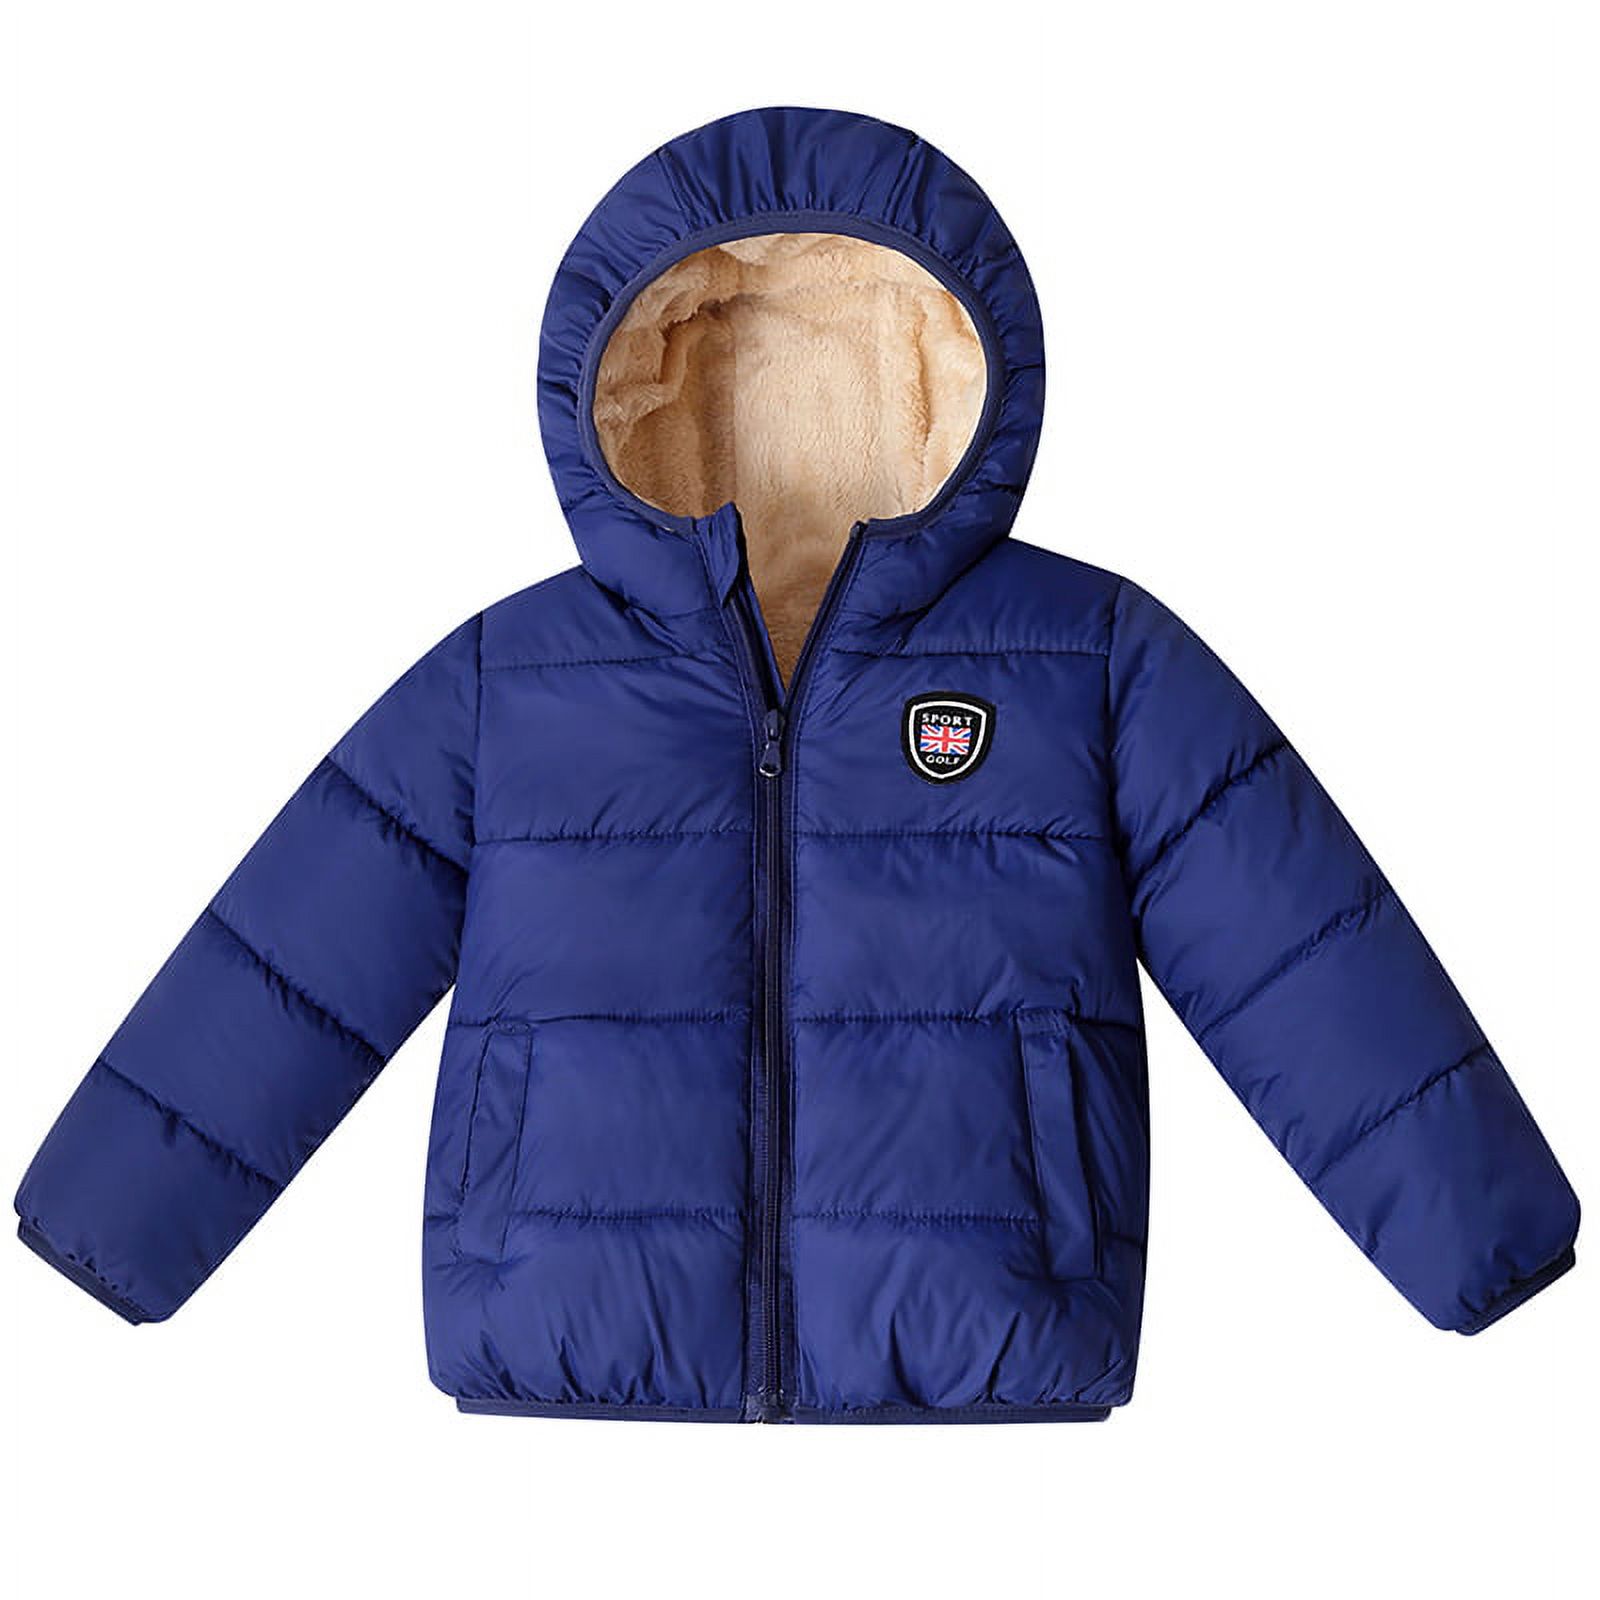 Winter Children Kid's Boy Girl Warm Hooded Jacket Coat Cotton-padded Jacket Parka Overcoat Thick Down Coat for 2-7T - image 3 of 7